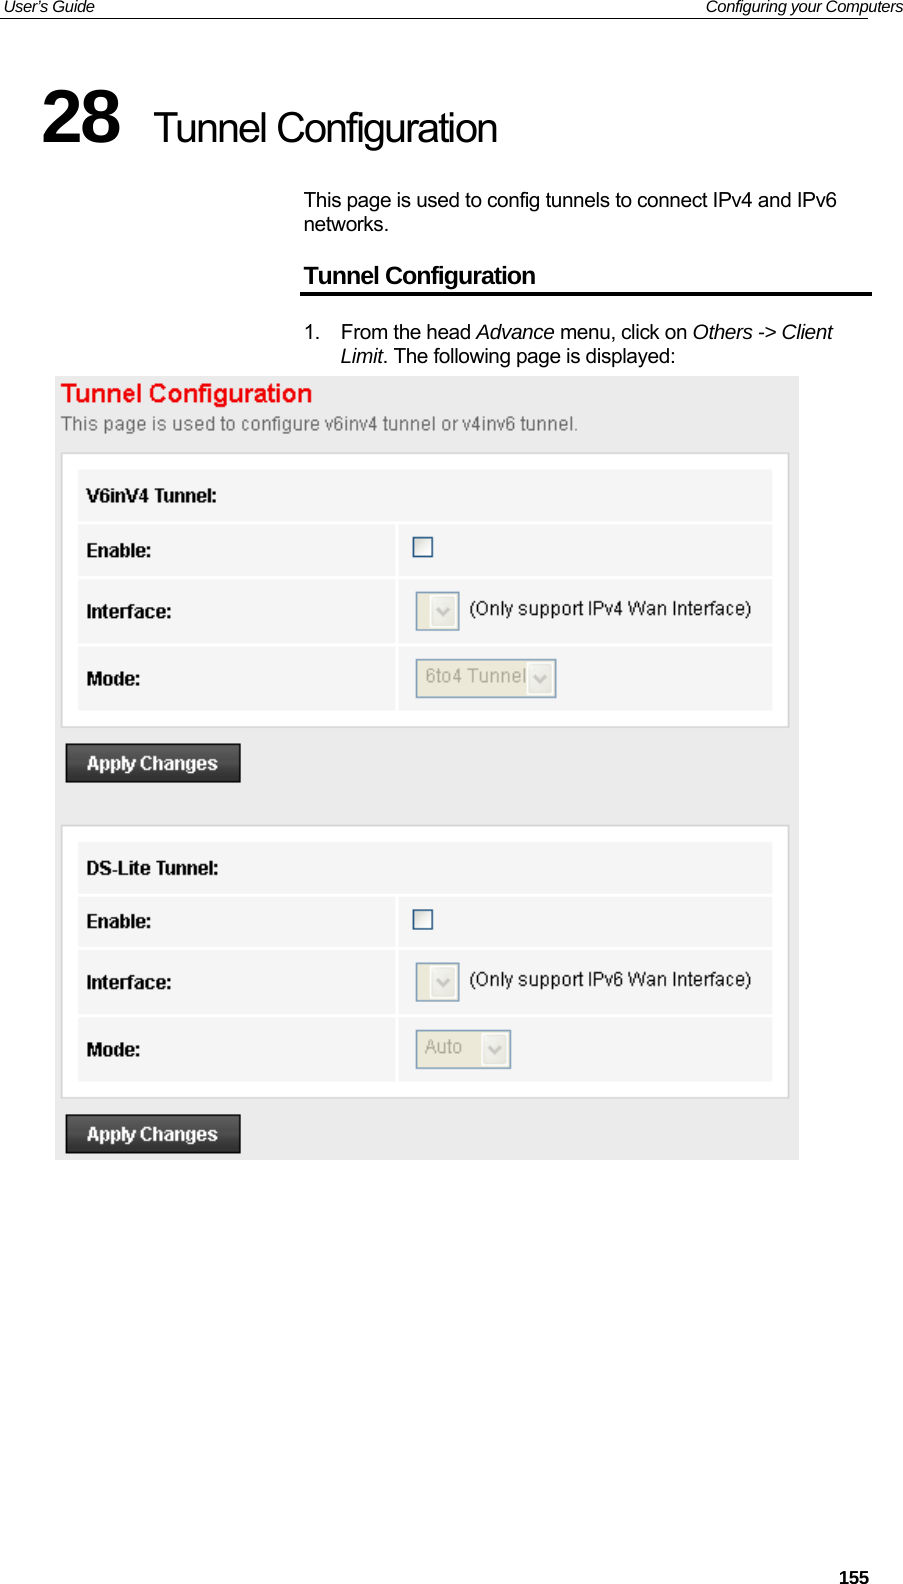 User’s Guide   Configuring your Computers  15528  Tunnel Configuration This page is used to config tunnels to connect IPv4 and IPv6 networks. Tunnel Configuration 1. From the head Advance menu, click on Others -&gt; Client Limit. The following page is displayed:         